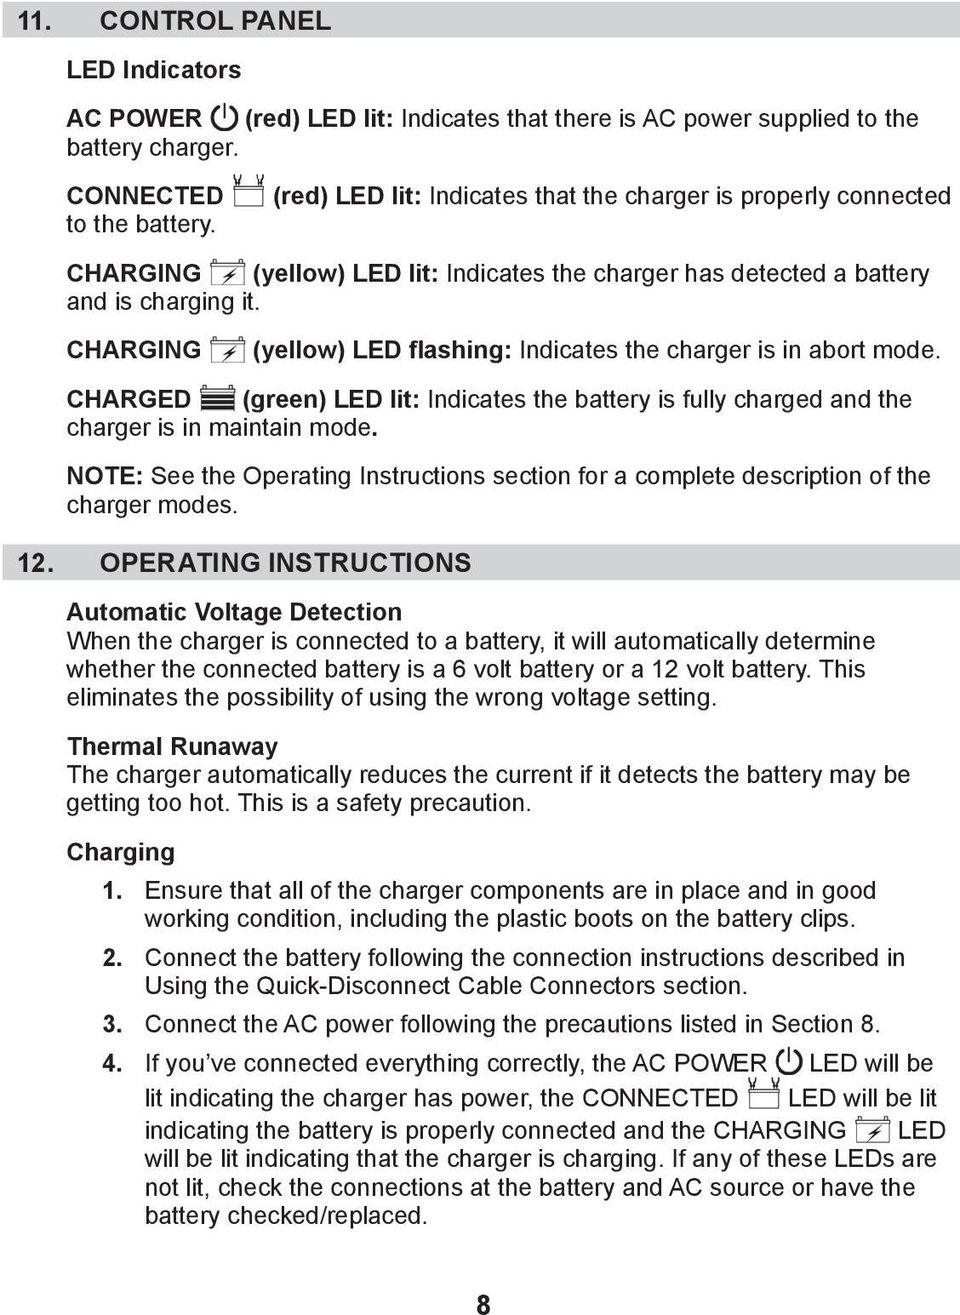 CHARGING (yellow) LED flashing: Indicates the charger is in abort mode. CHARGED (green) LED lit: Indicates the battery is fully charged and the charger is in maintain mode.